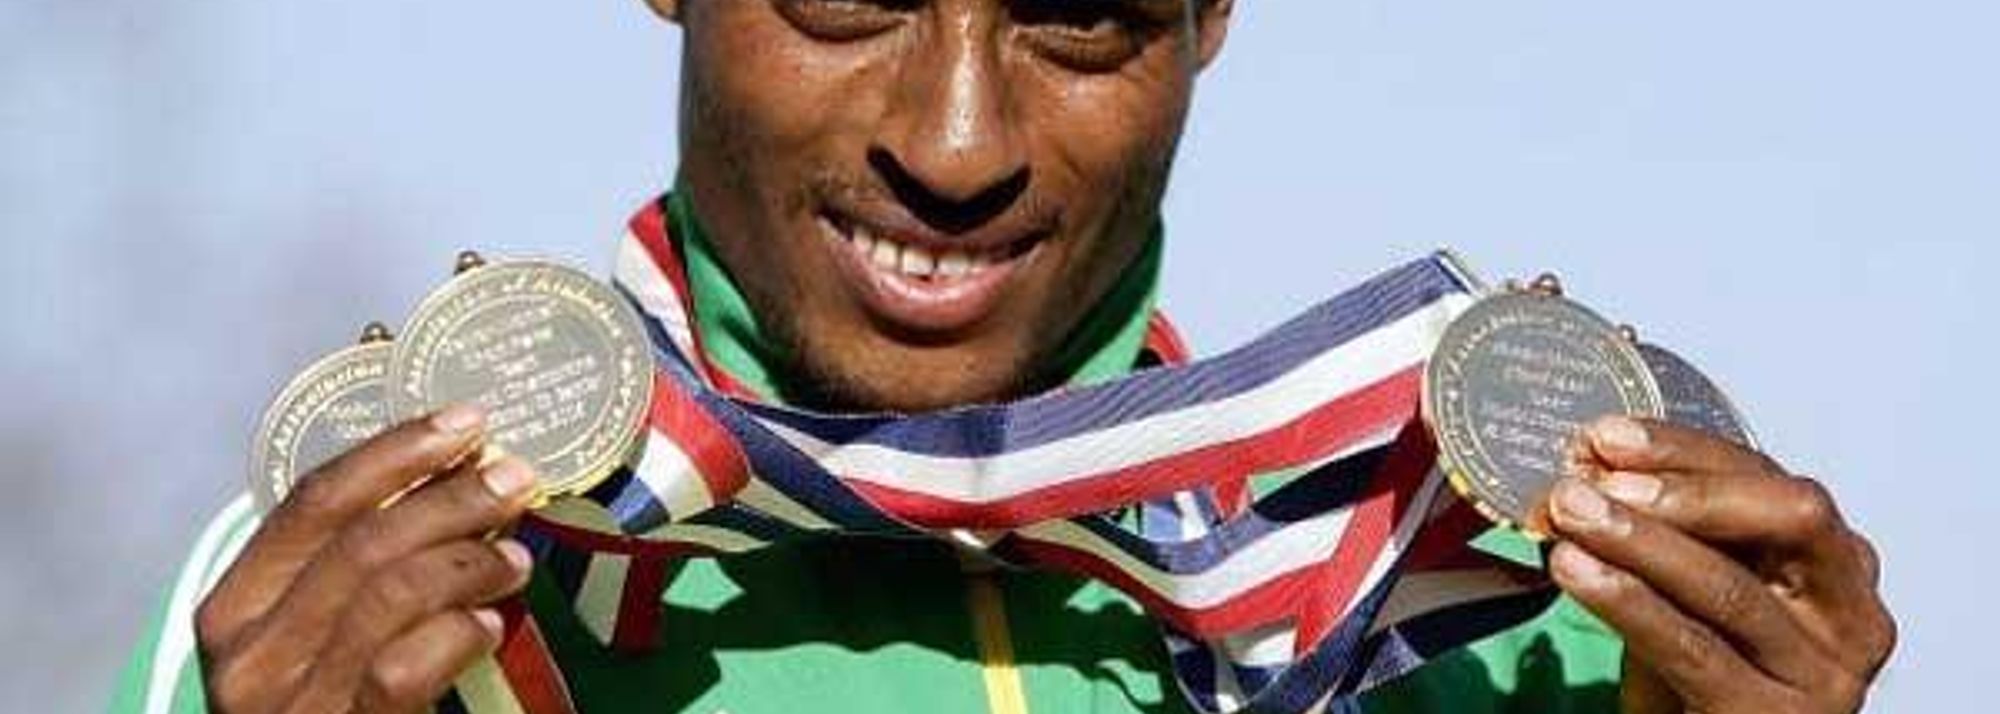 If Kenenisa Bekele's short course victory in the IAAF World Cross Country Championships on Saturday was a triumph of the human spirit, then his successful defense of the long course crown 24 hours later suspended belief even further.